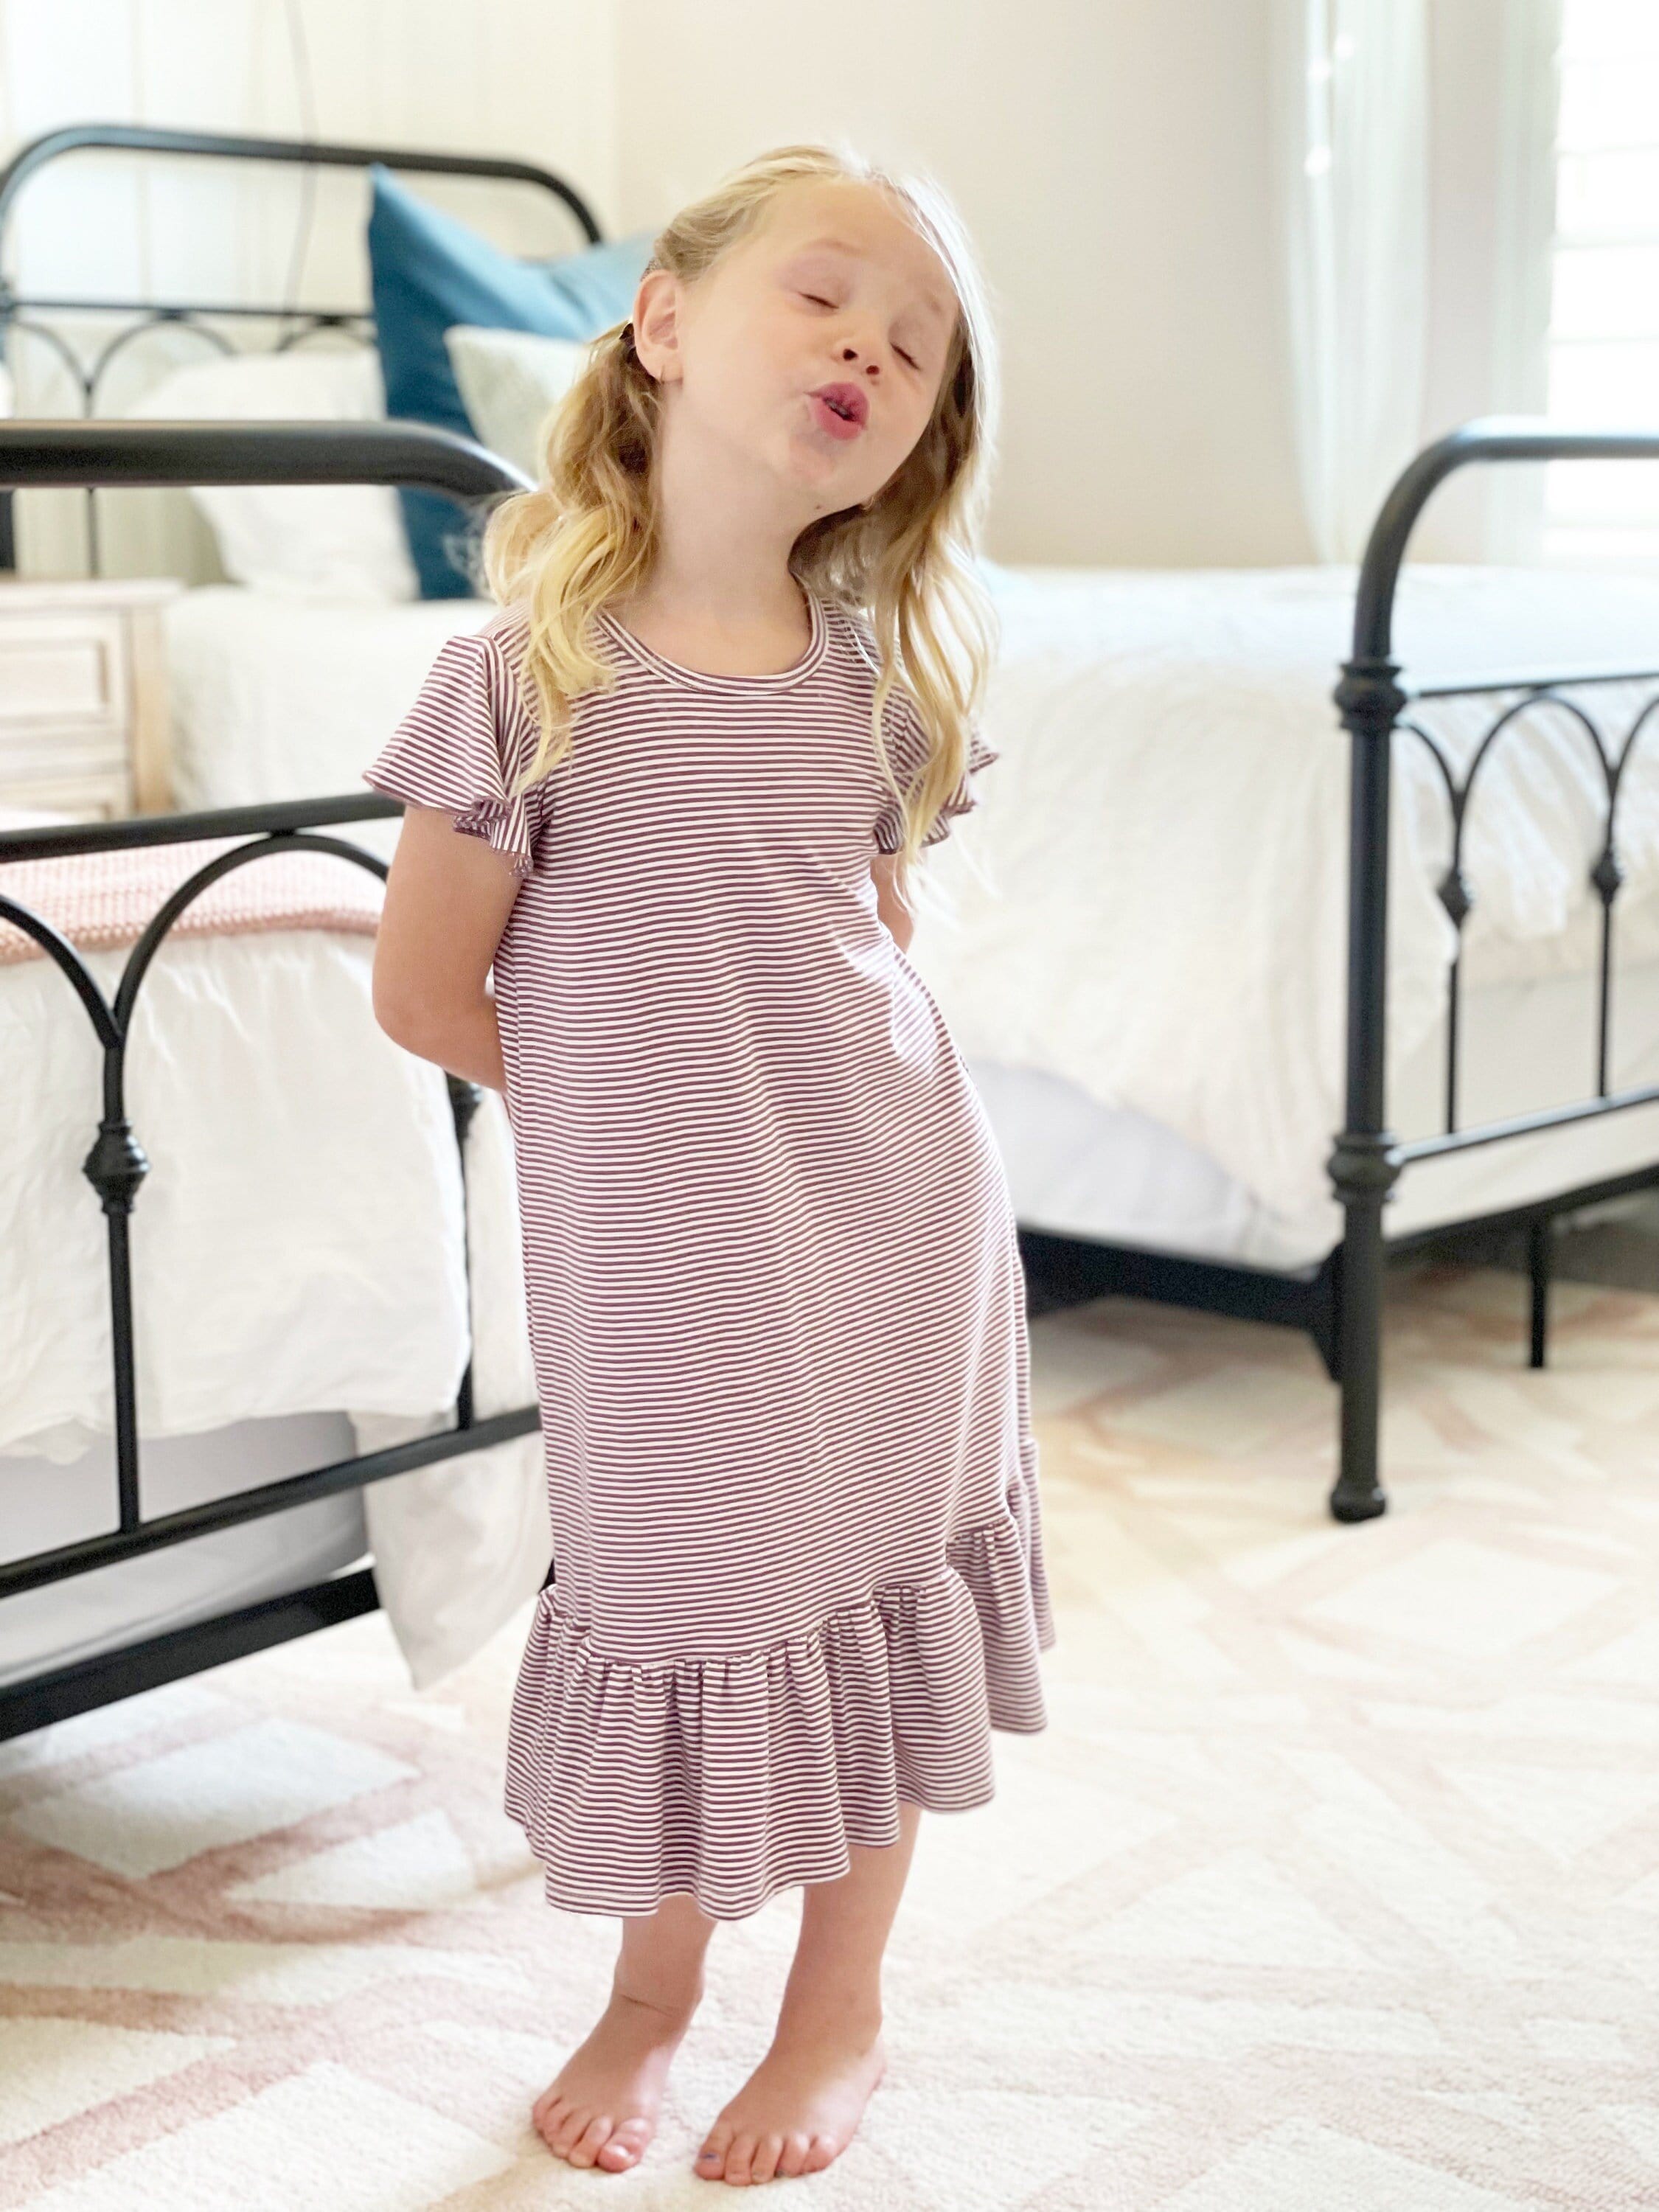 NEW** Halle Nightgown Russet Stripe, Kids Nightgown, Baby Nightgown, Toddler Nightgown, Girl Nightgown, Toddler Gift, Baby Gift